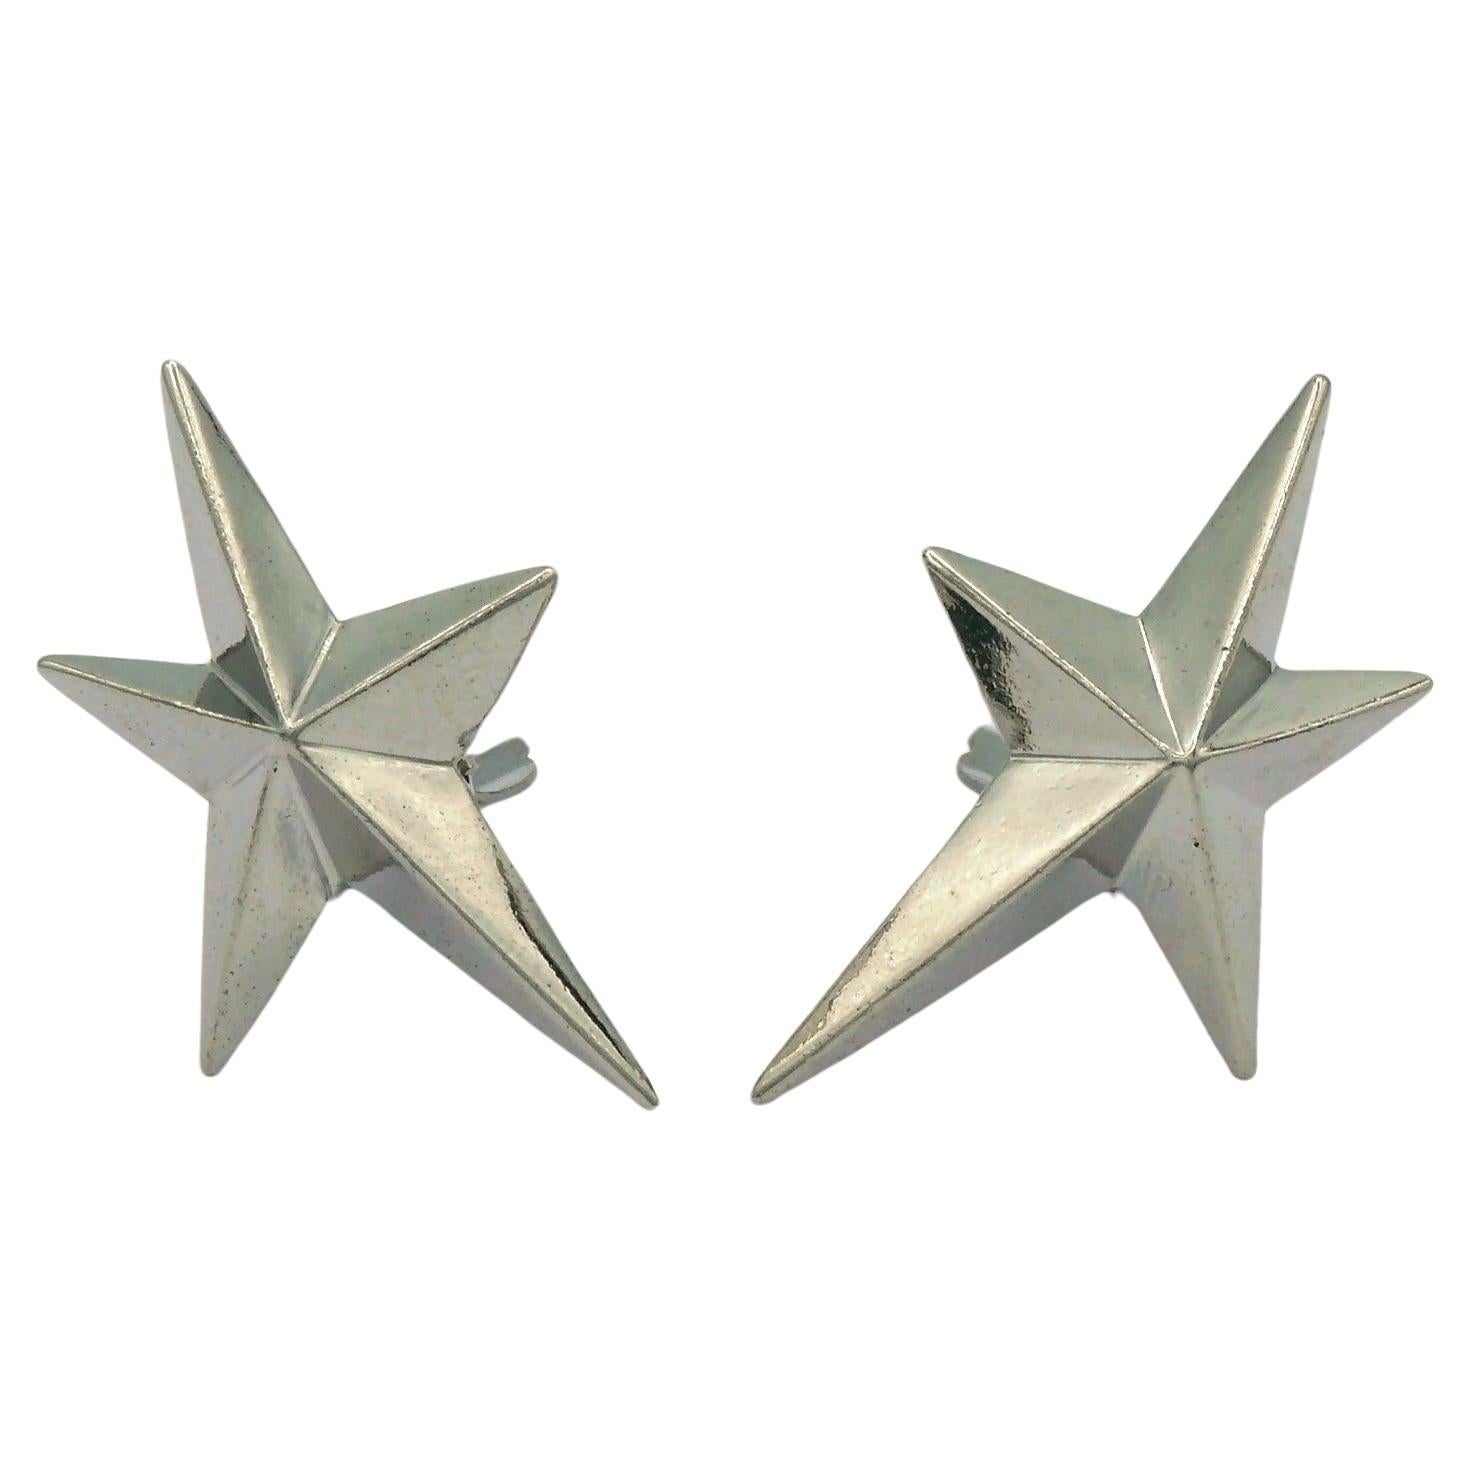 THIERRY MUGLER Vintage Silver Tone Iconic Star Clip-On Earrings